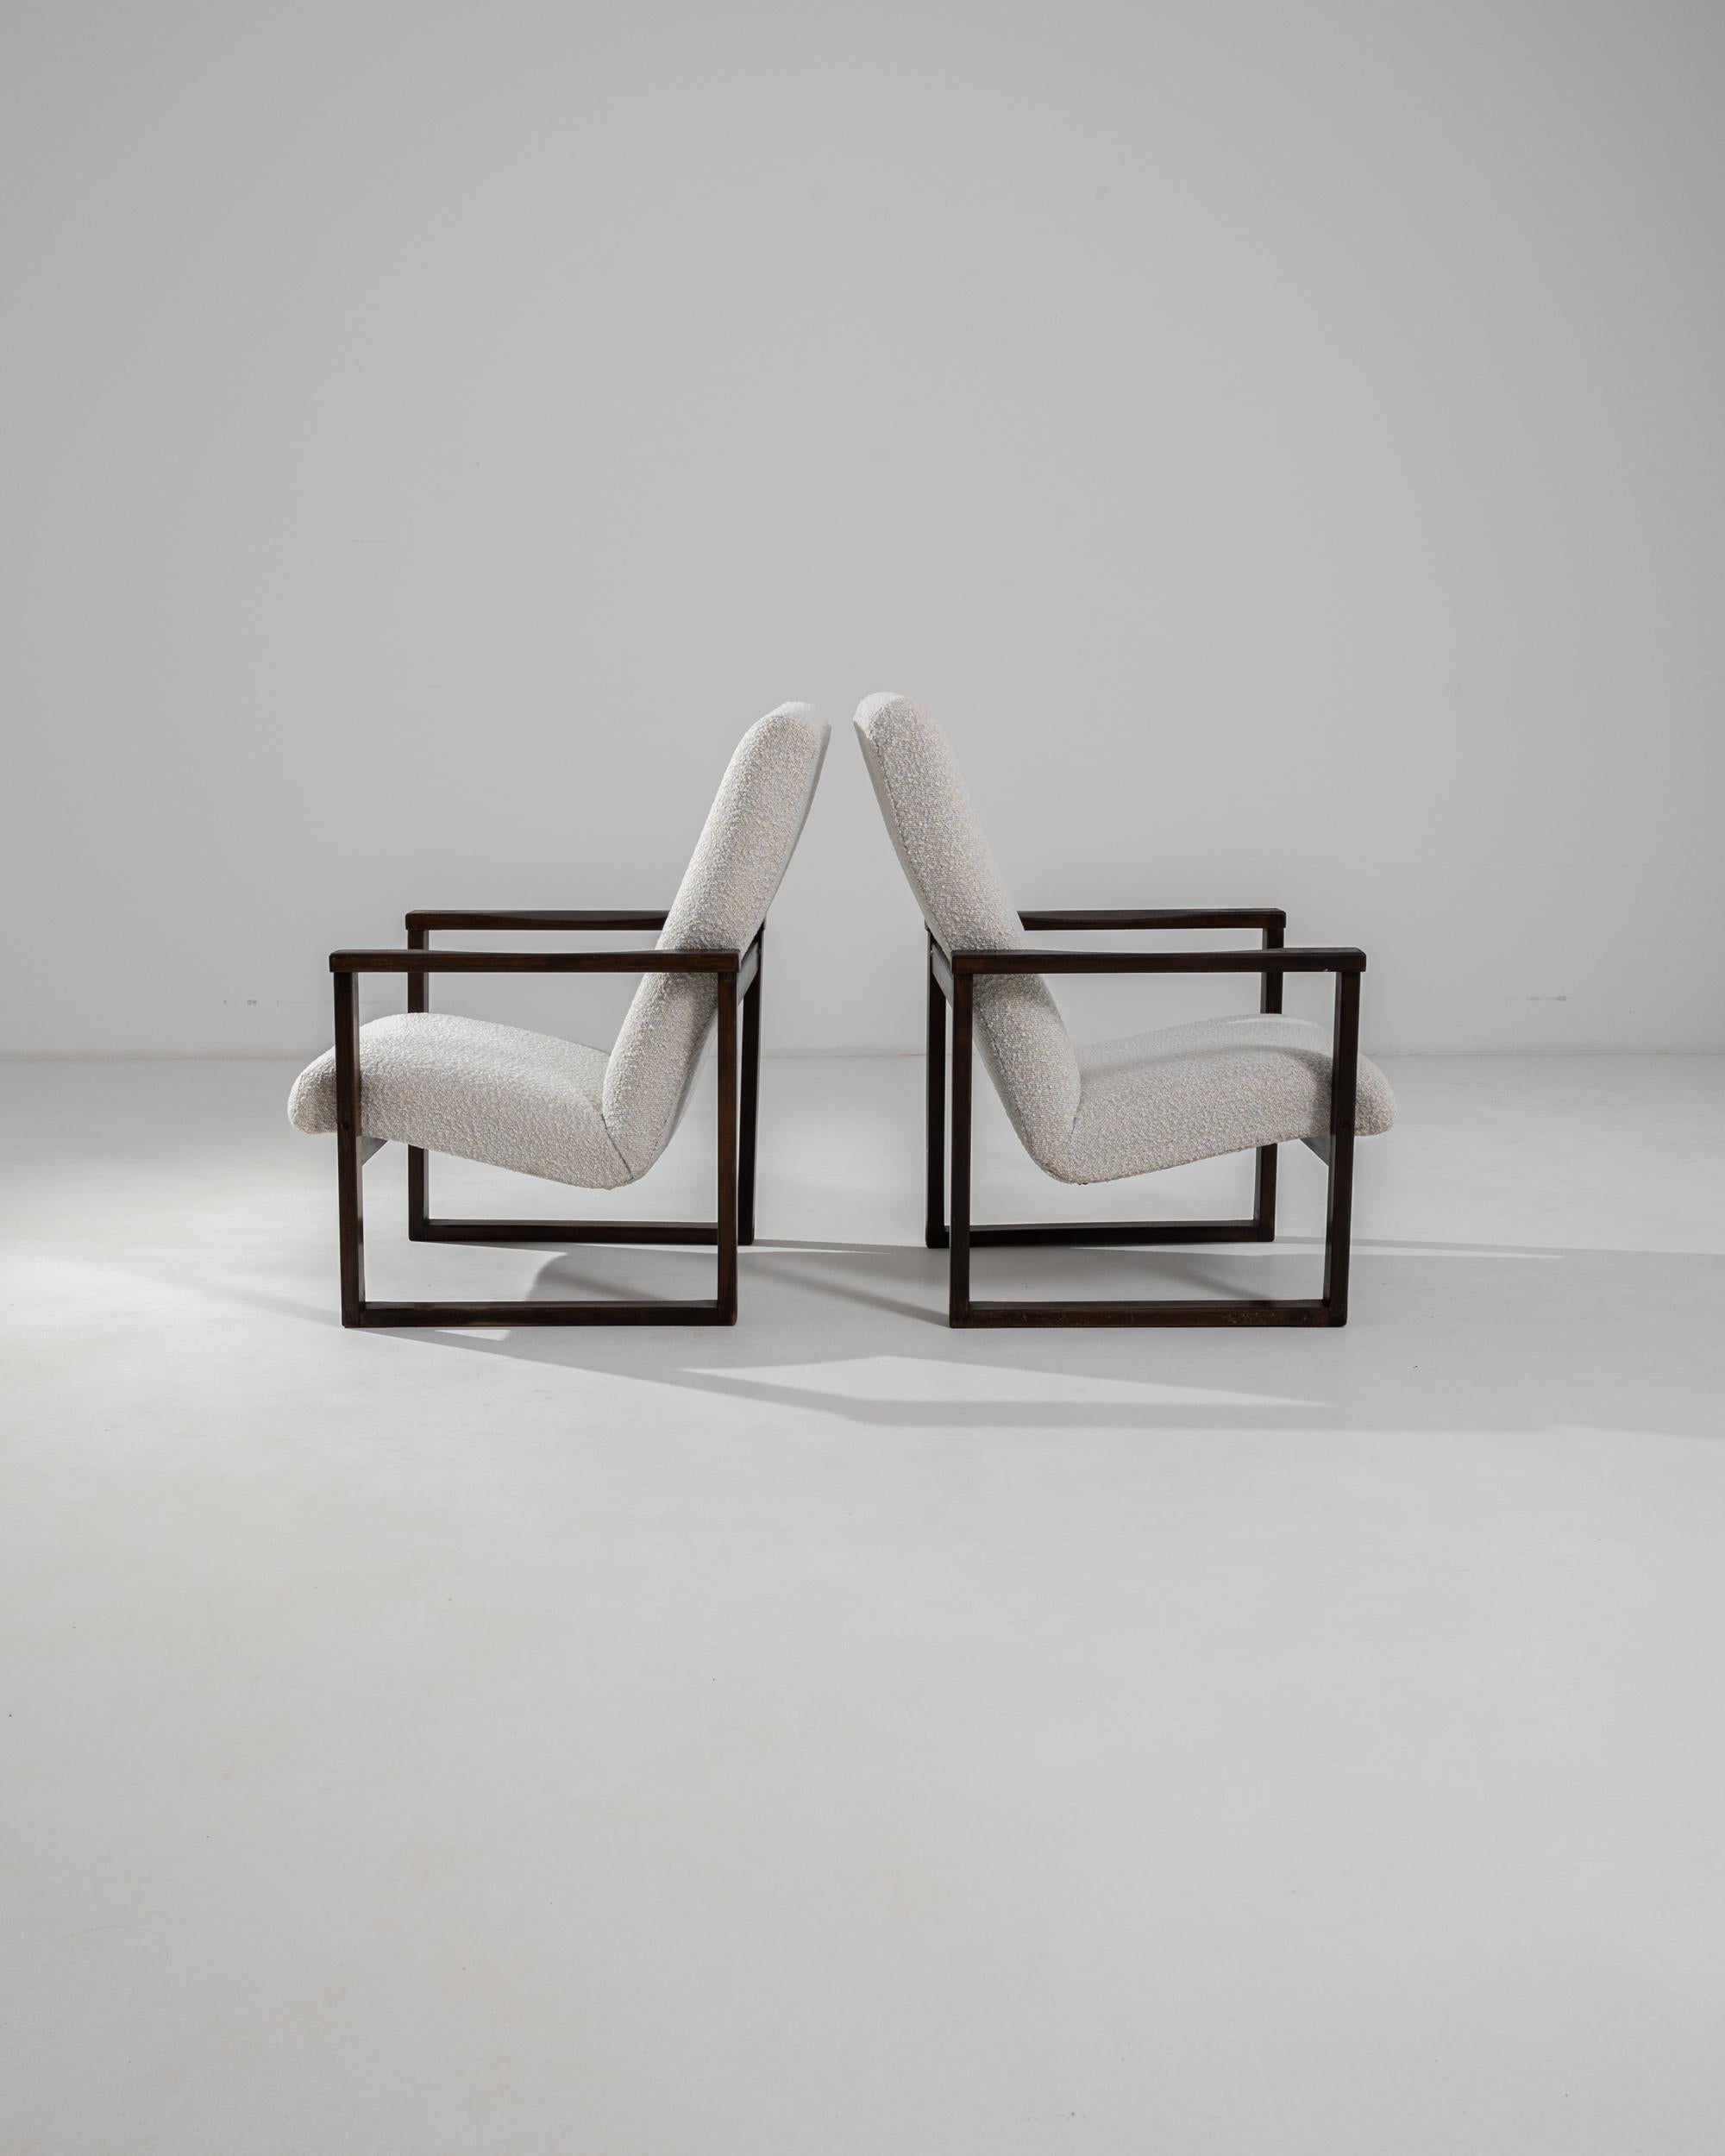 The graphic silhouette of this pair of vintage Modernist armchairs makes a striking impression. Made in Czechia in the 20th century, a cushioned seat appears to float weightlessly between two perfectly square frames of polished wood. This ingenious